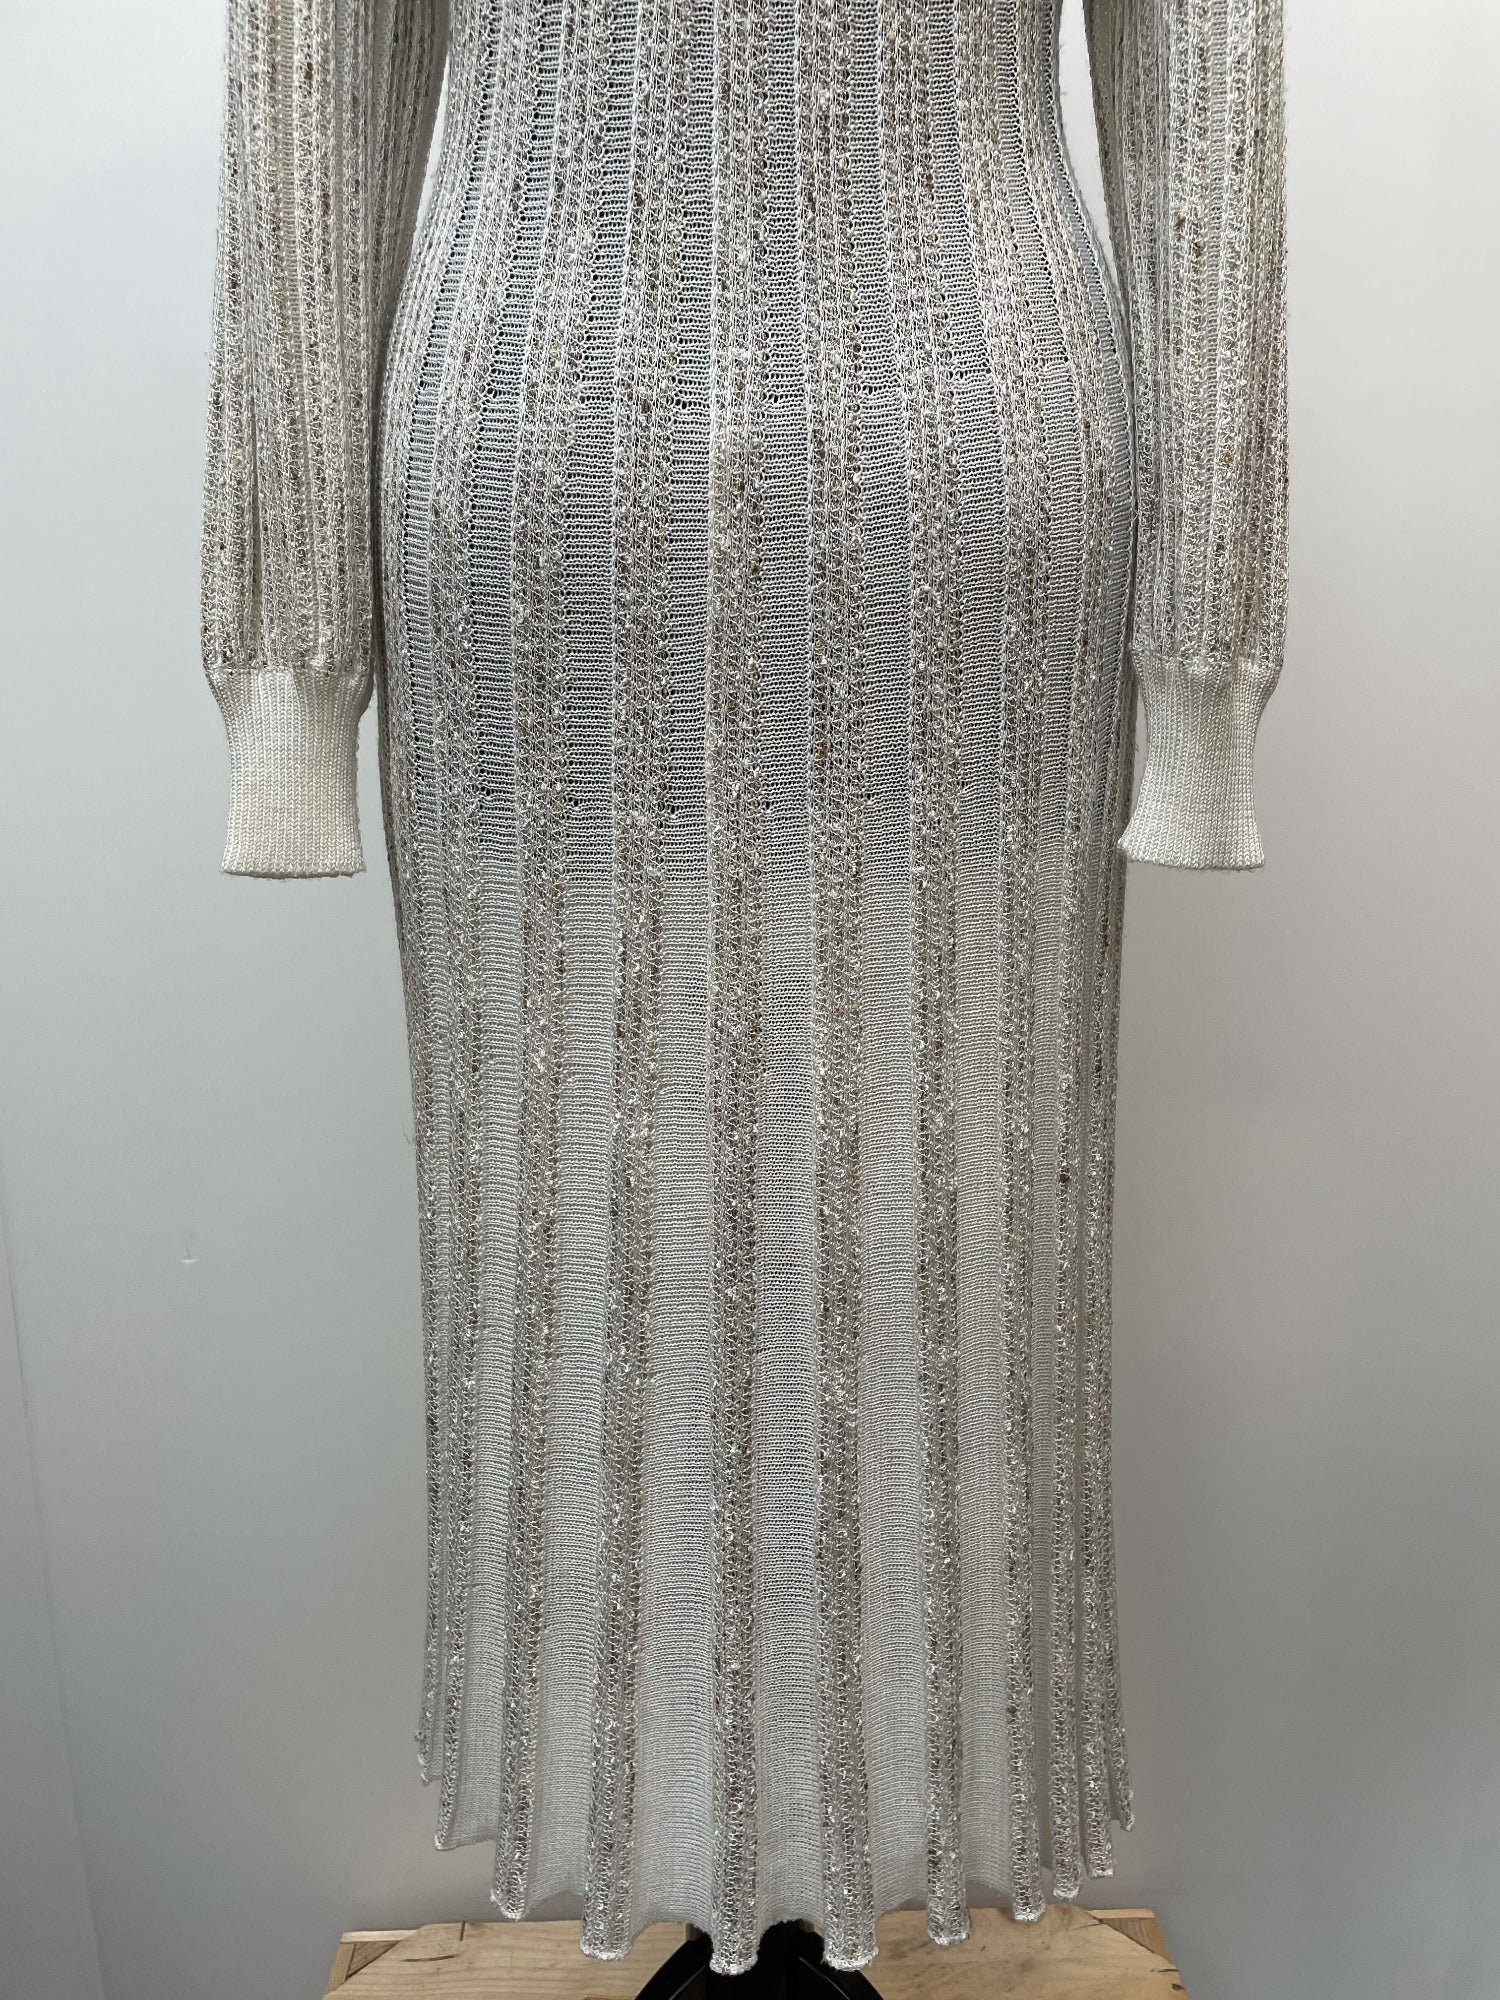 womens  white  vintage  Urban Village Vintage  urban village  tricoville  stretch fabric  sheer  semi sheer  patterned dress  patterned  maxi dress  maxi  long sleeve  light knit  knitwear  knitted  knit dress  knit  elasticated  dress  button up  button  8  70s  1970s